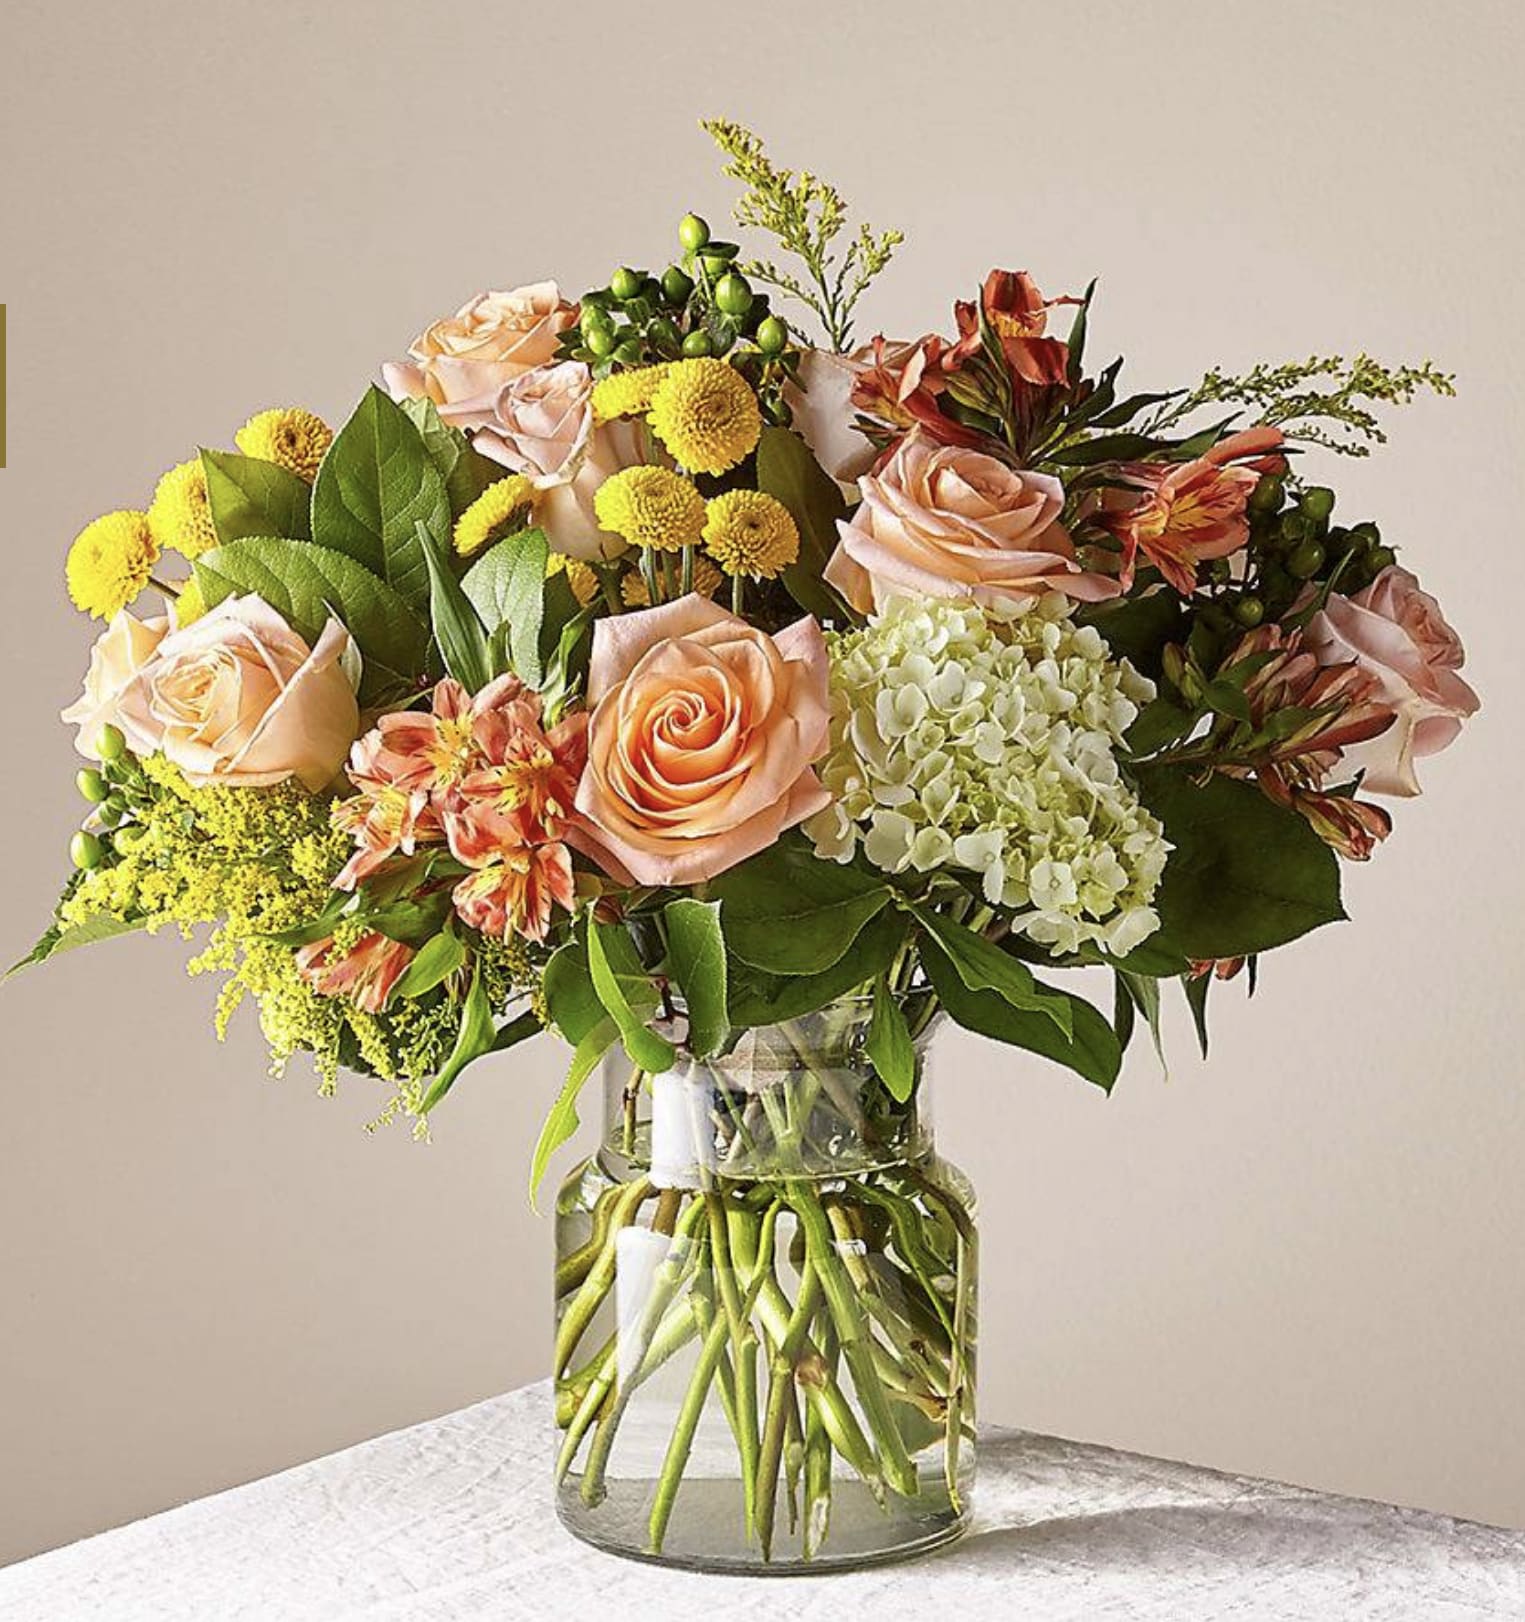 Life is a Peach Bouquet - This radiant bouquet is designed with a dreamy mix of peach, yellow, and light green blooms to create the perfect impression. Whether it's sent as a pick–me–up, a celebration, or just to make someone smile, everything is just peachy once this arrangement arrives.